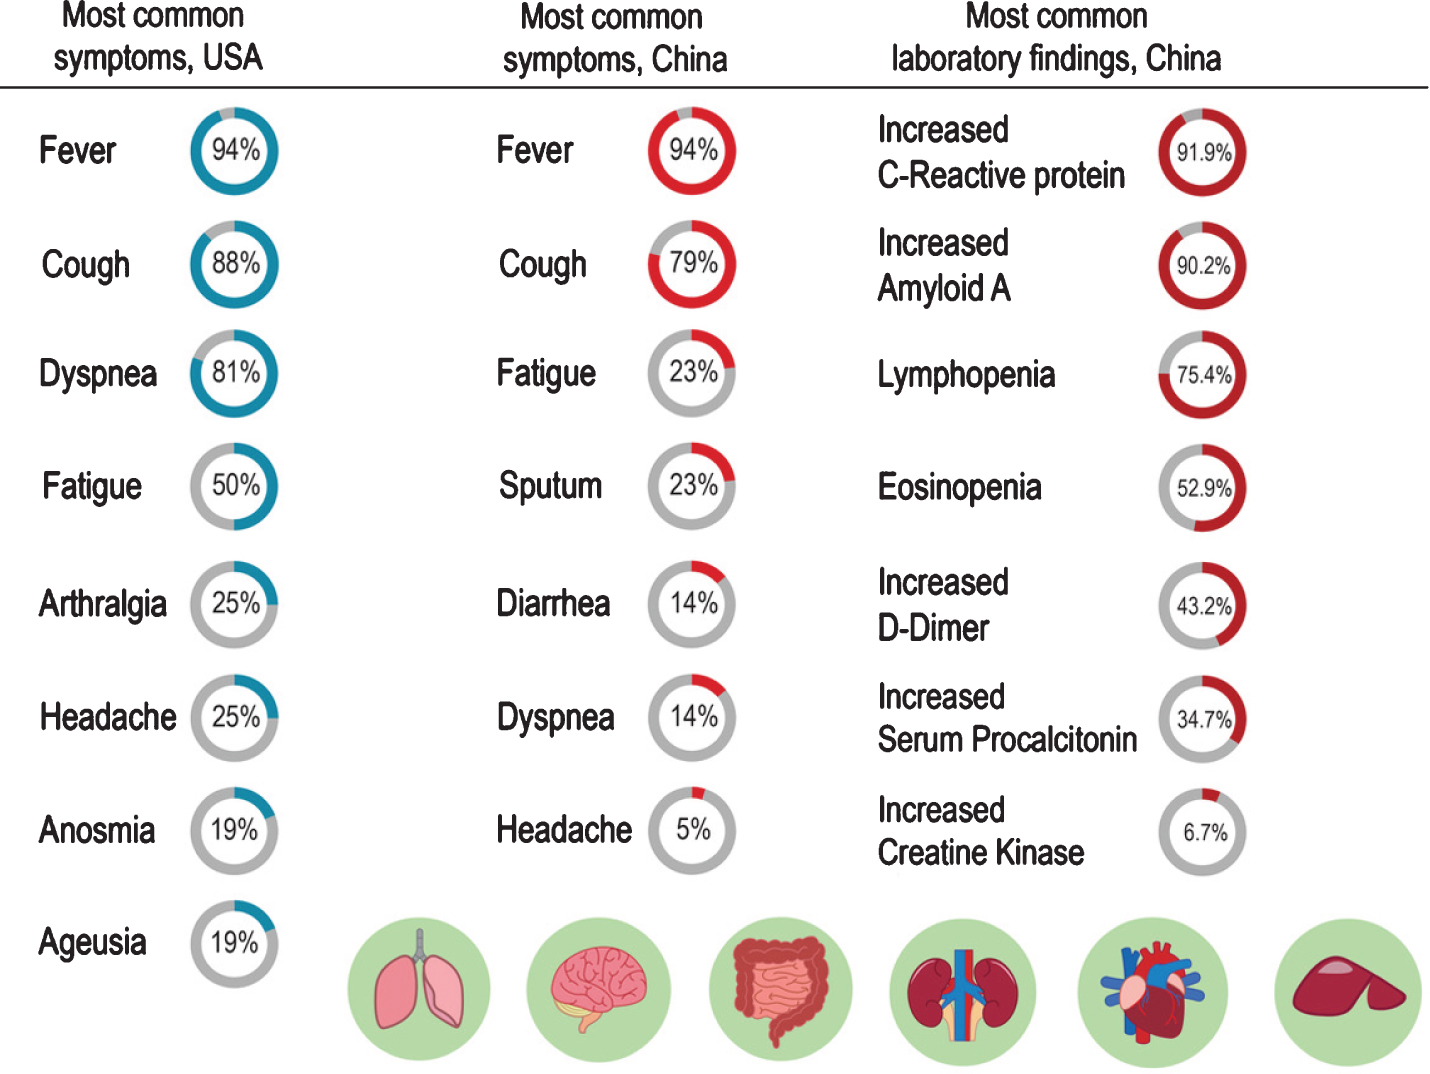 Most common COVID-19 symptoms in US and China. Most common laboratory findings in COVID-19 in China [31, 43–45]. Illustrated by Dr. Joe Bolanos.